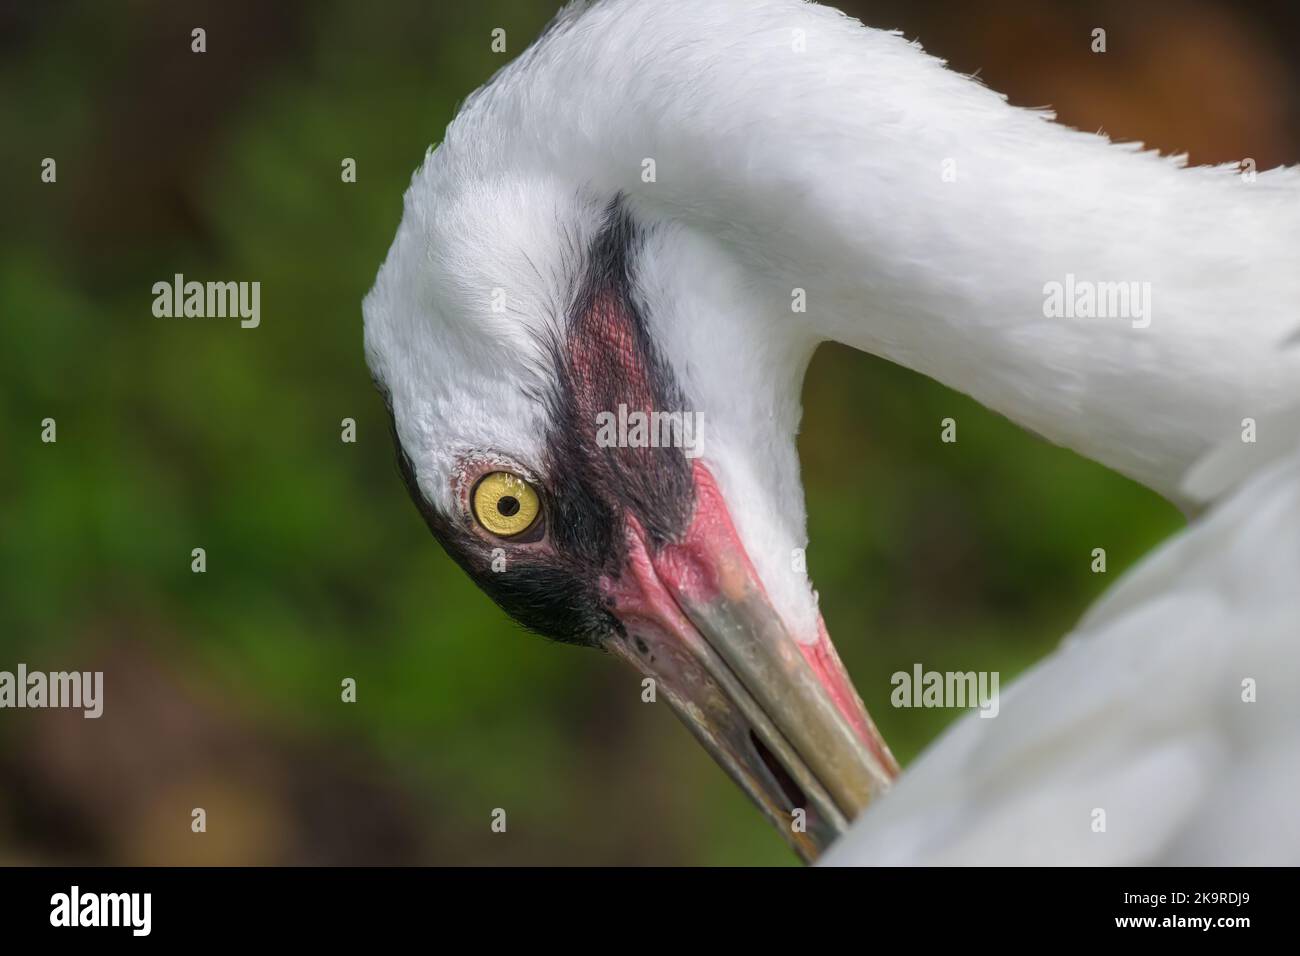 Close-up head shot photography of a whooping crane. Selective focus on eye. Stock Photo